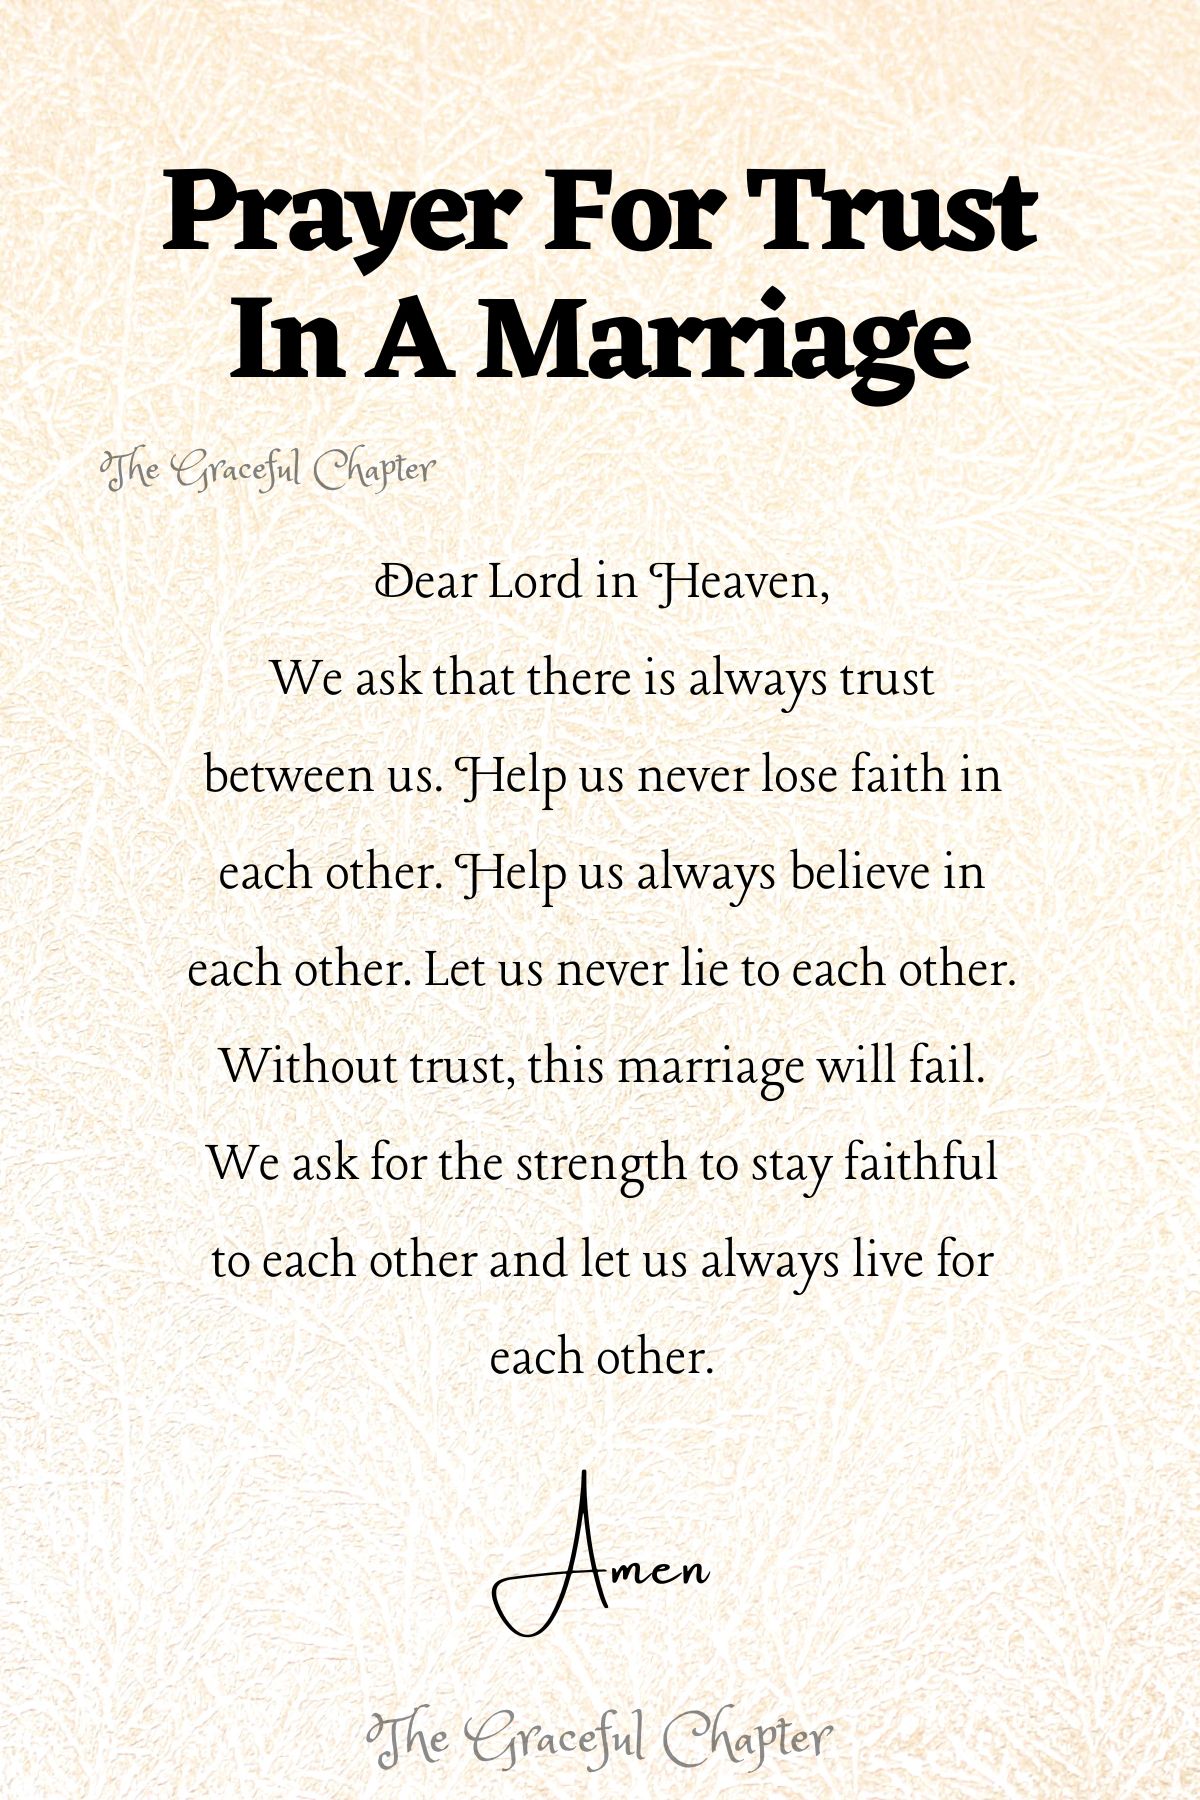 Prayer for trust in a marriage